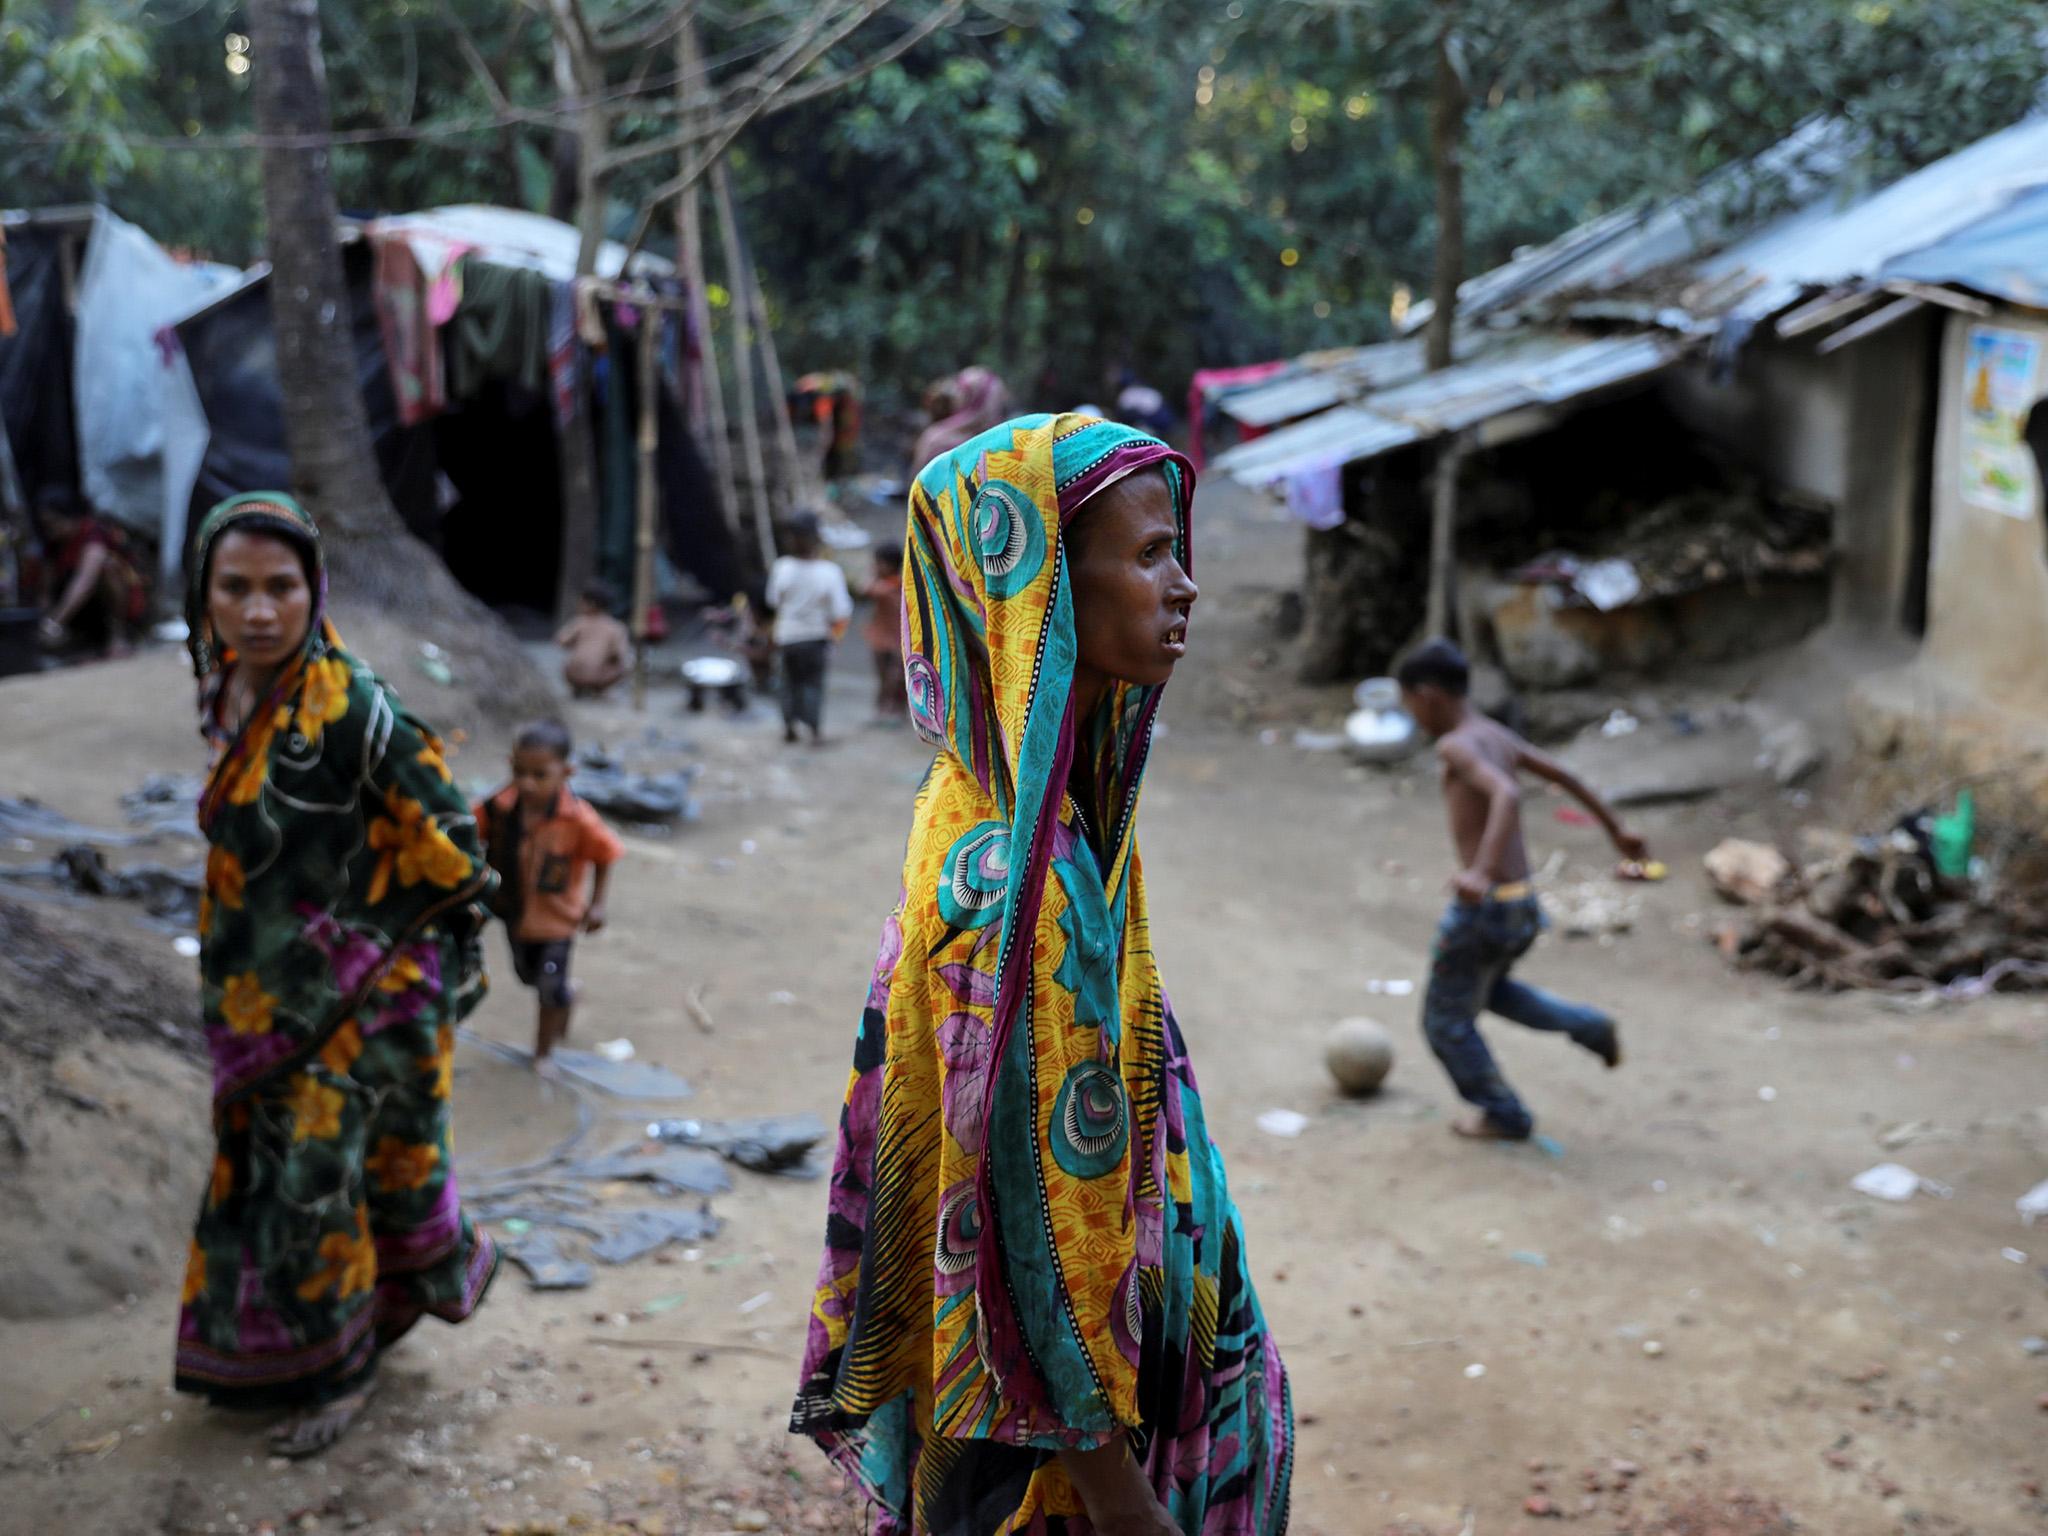 The UK must not support an agreement that could put thousands more Rohingya lives in serious danger